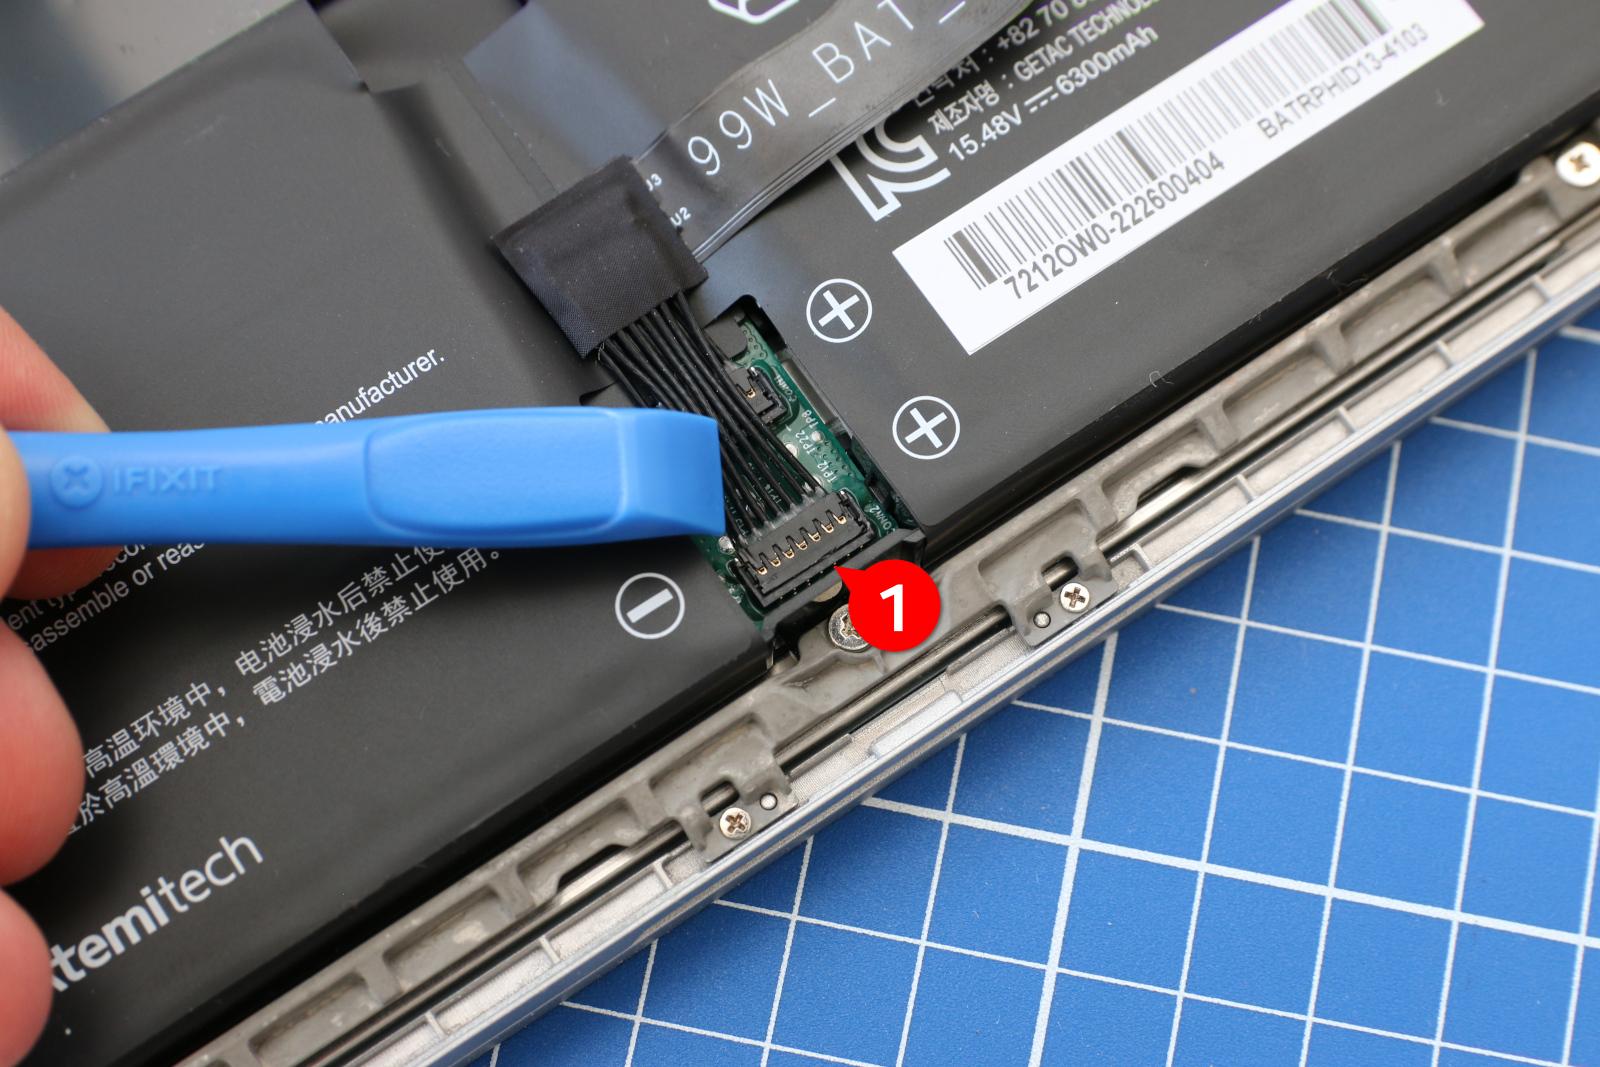 You have to be very careful when disconnecting the battery cable. Be careful not to damage the thin cables: Pull only on the plastic plug and not on the cable.